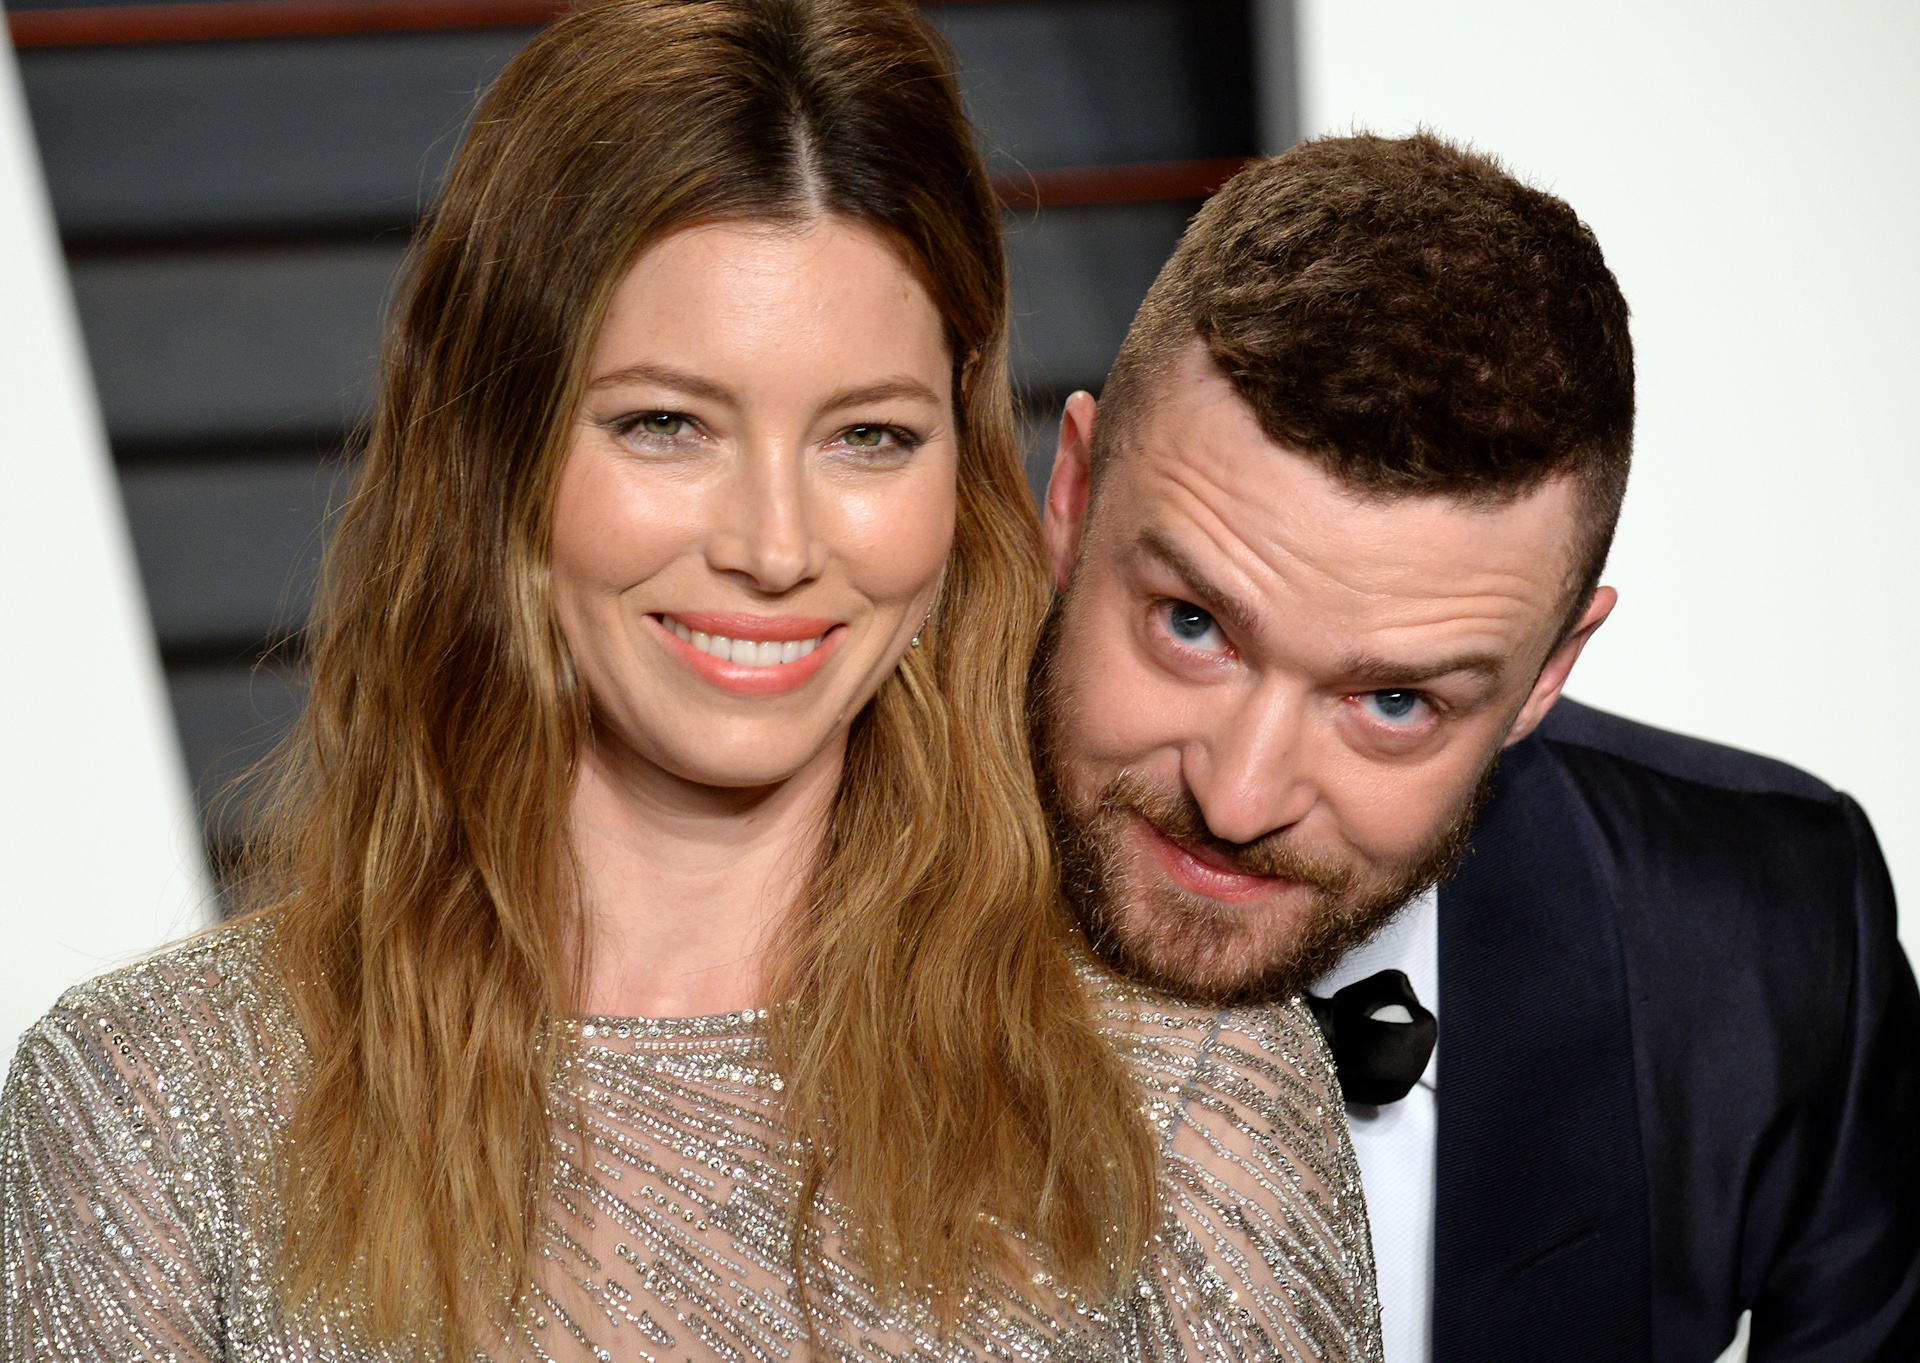 Jessica Biel "I was barely 10 years old"